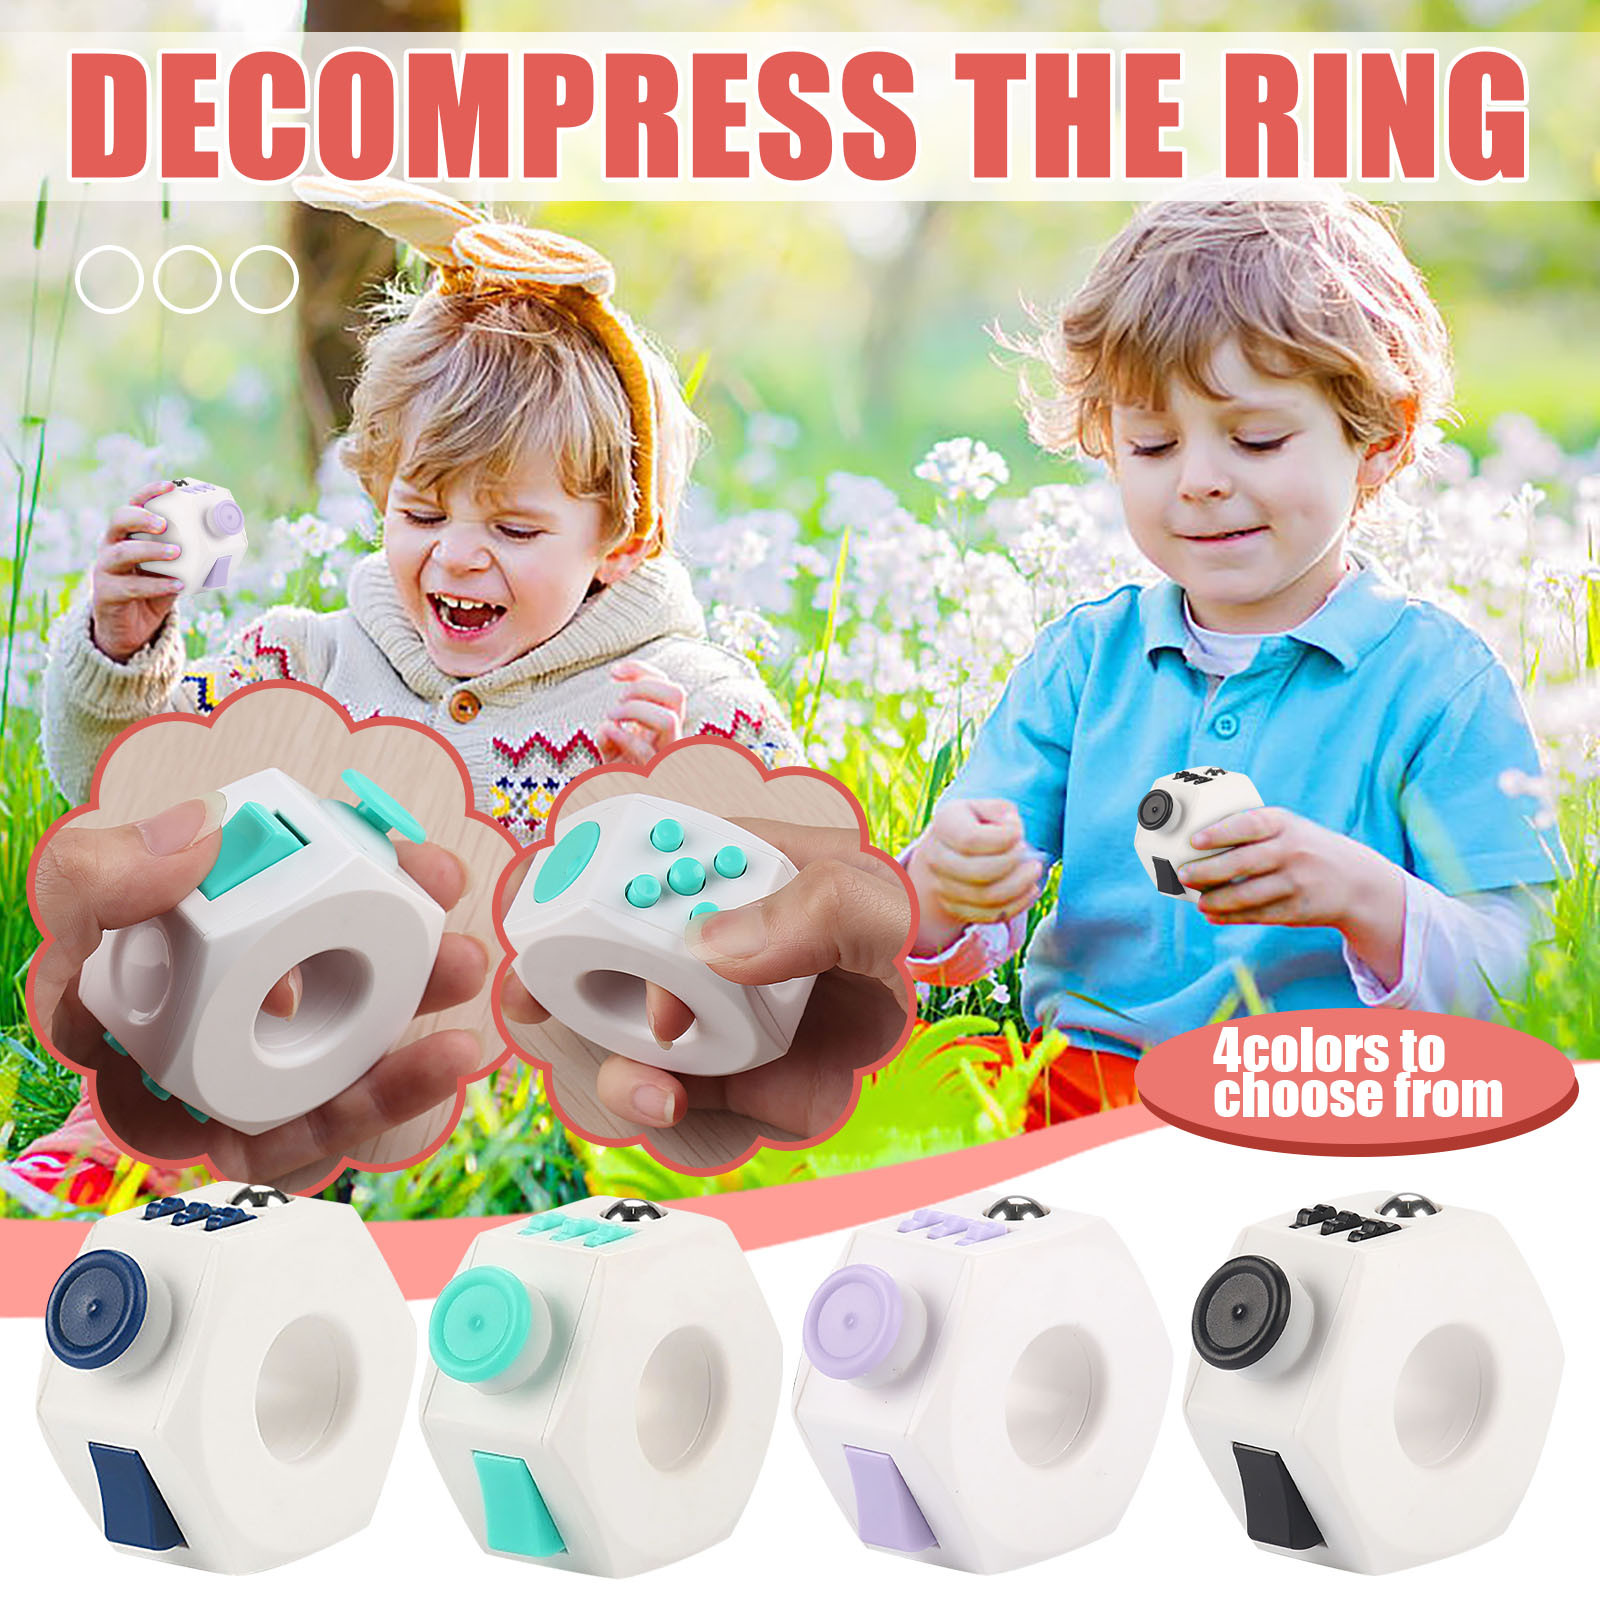 Decompression-Fidget-Rings-Toy-Press-Magic-Anti-Stress-Cube-EDC-Hand-For-Autism-ADHD-Anxiety-Relief--1855093-1